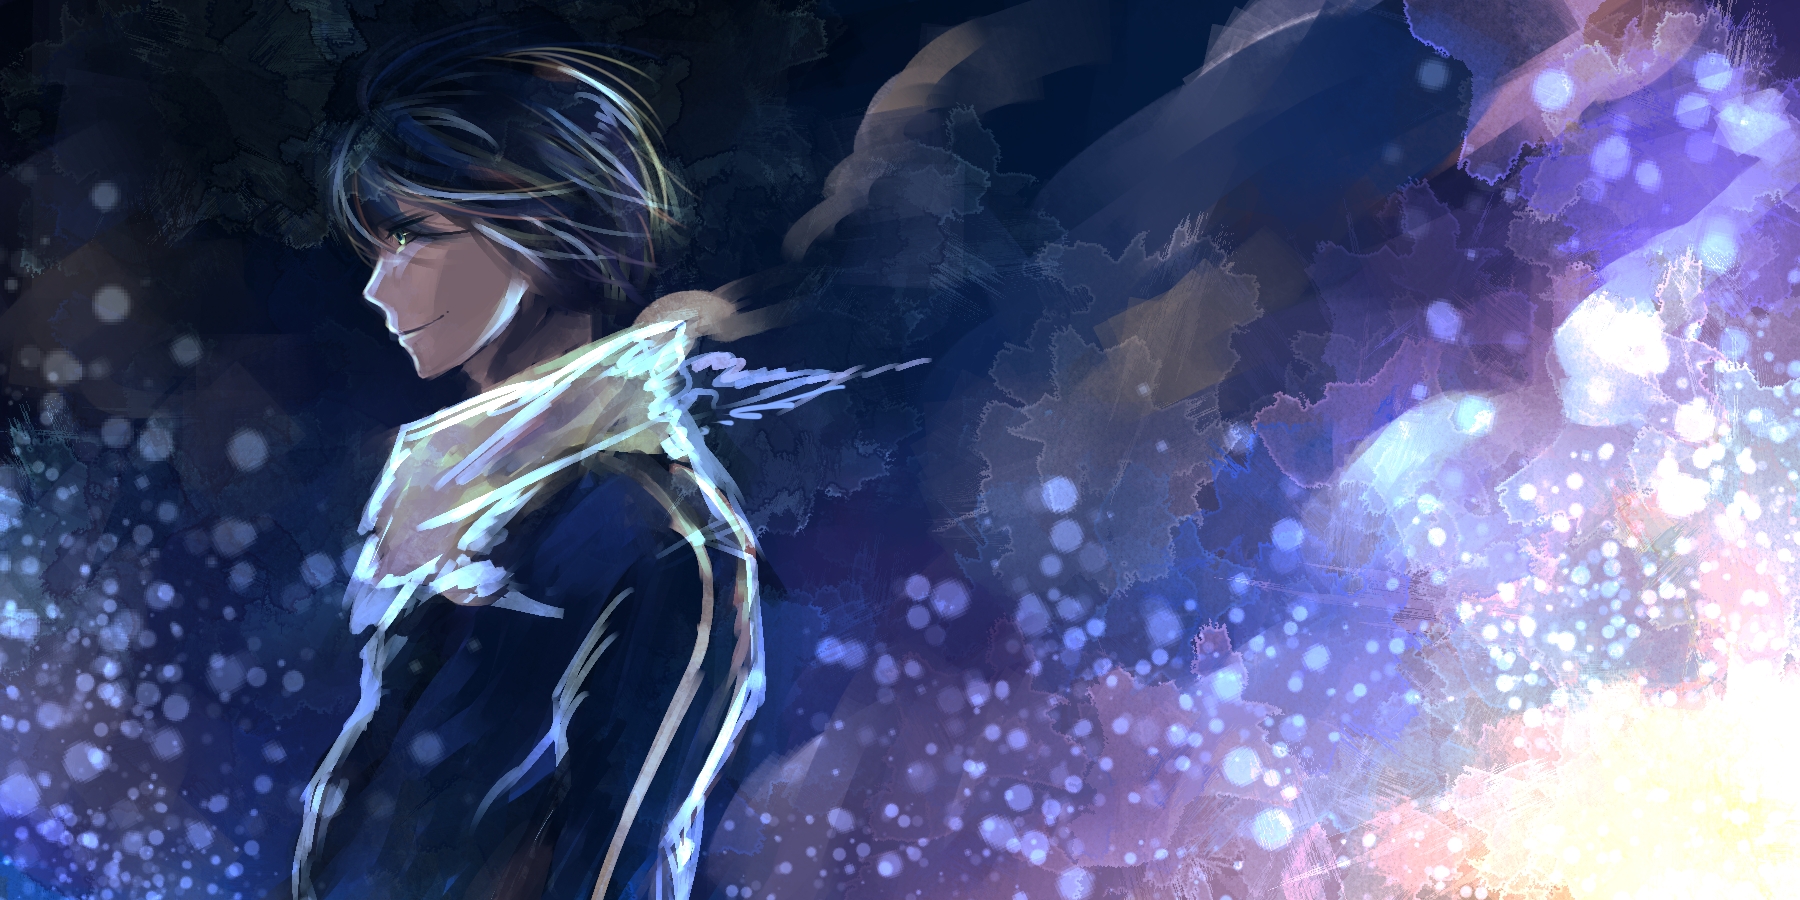 Noragami Wallpaper and Background Image | 1800x900 | ID ...